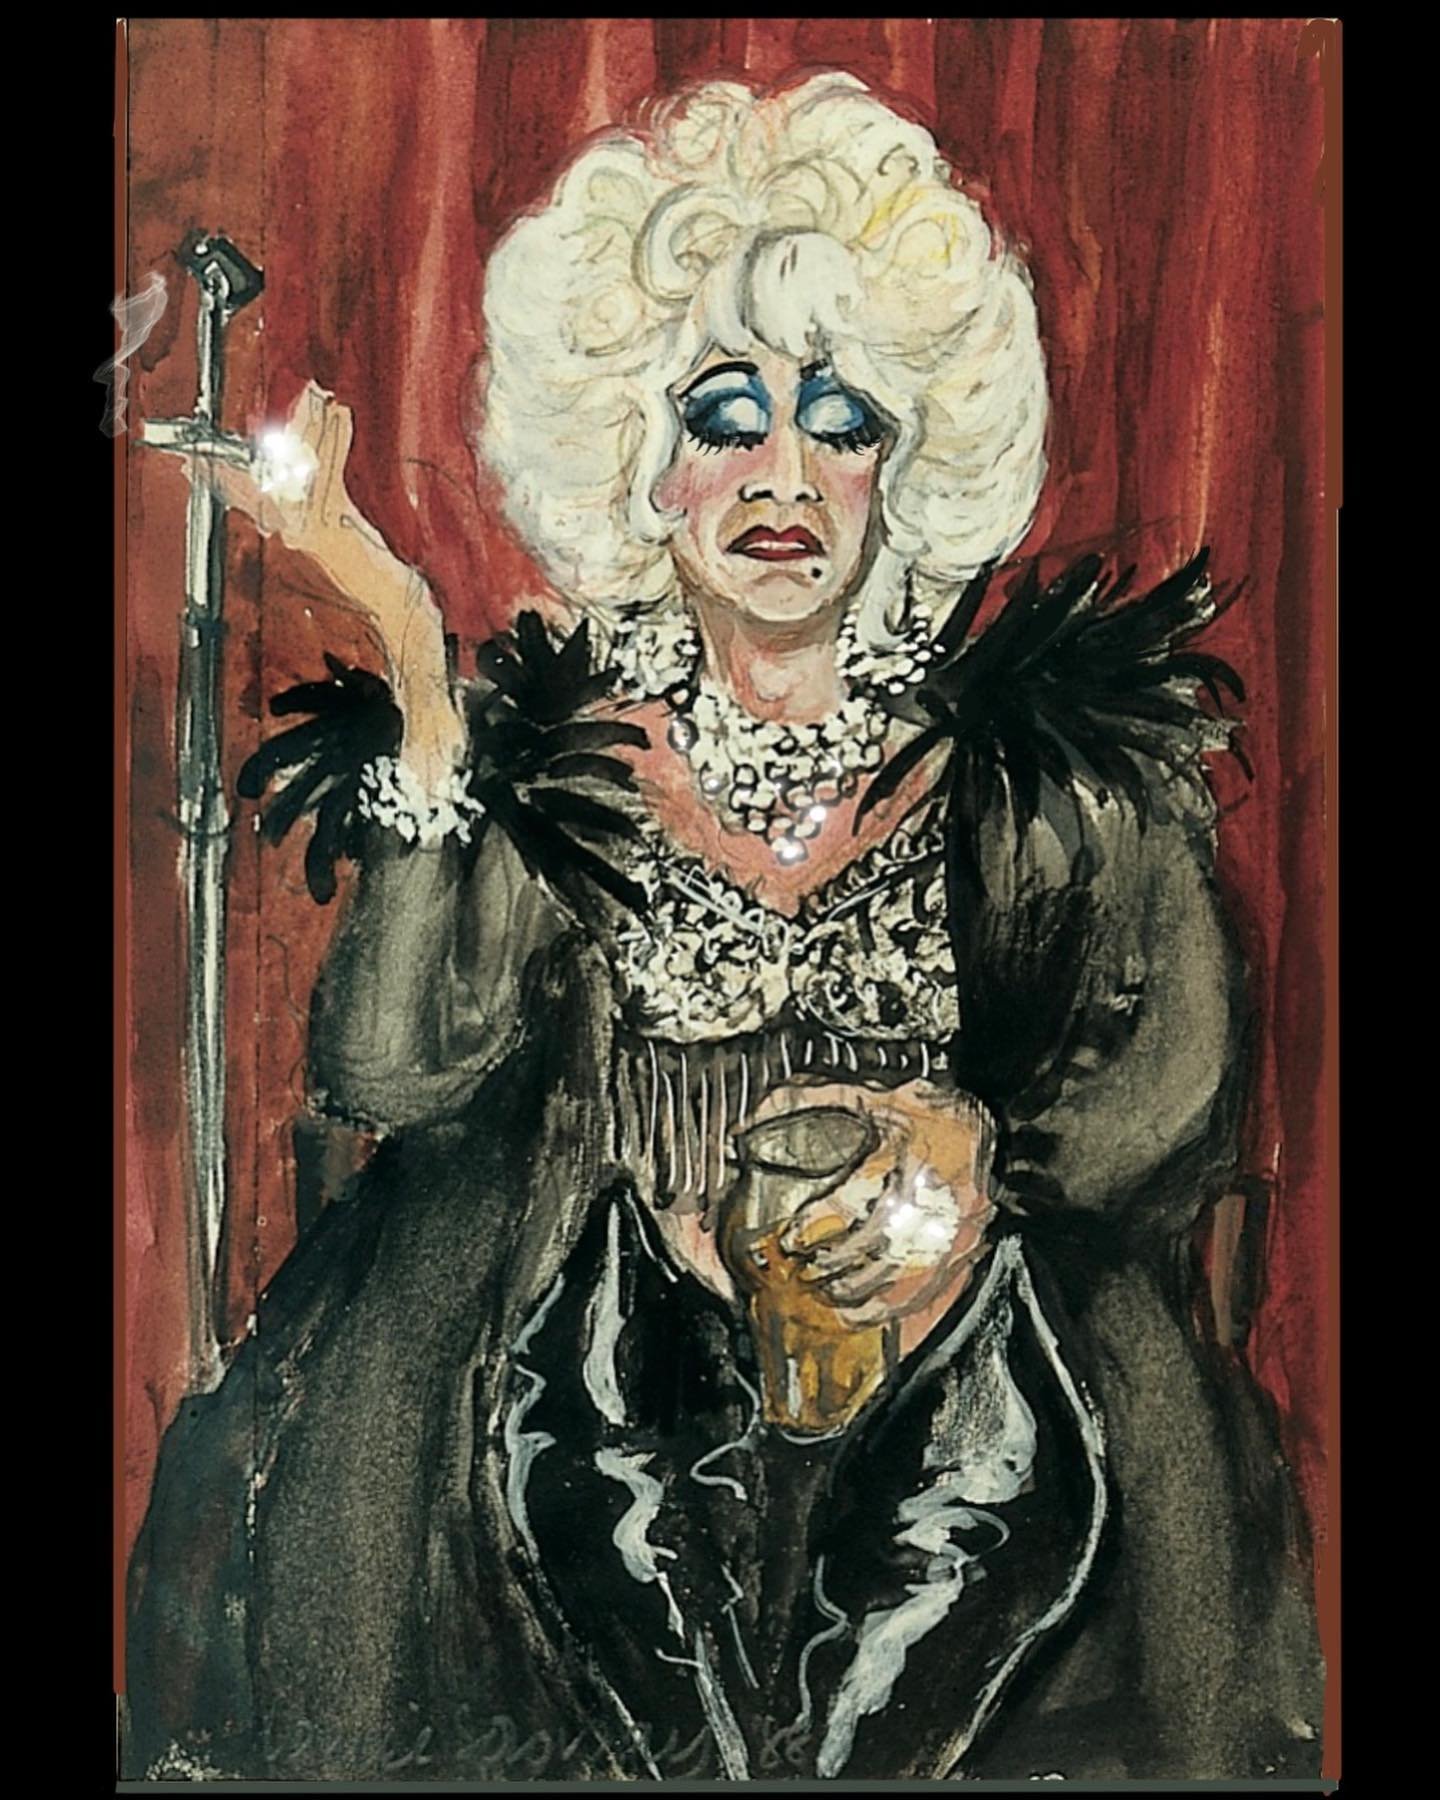 Sadly nearly all the characters I drew during London&rsquo;s 1980&rsquo;s Drag scene are no longer alive. Lily Savage being one of the last who died in March this year 2023. I saw some memorable drag shows, dementedly sketching away at live shows pro